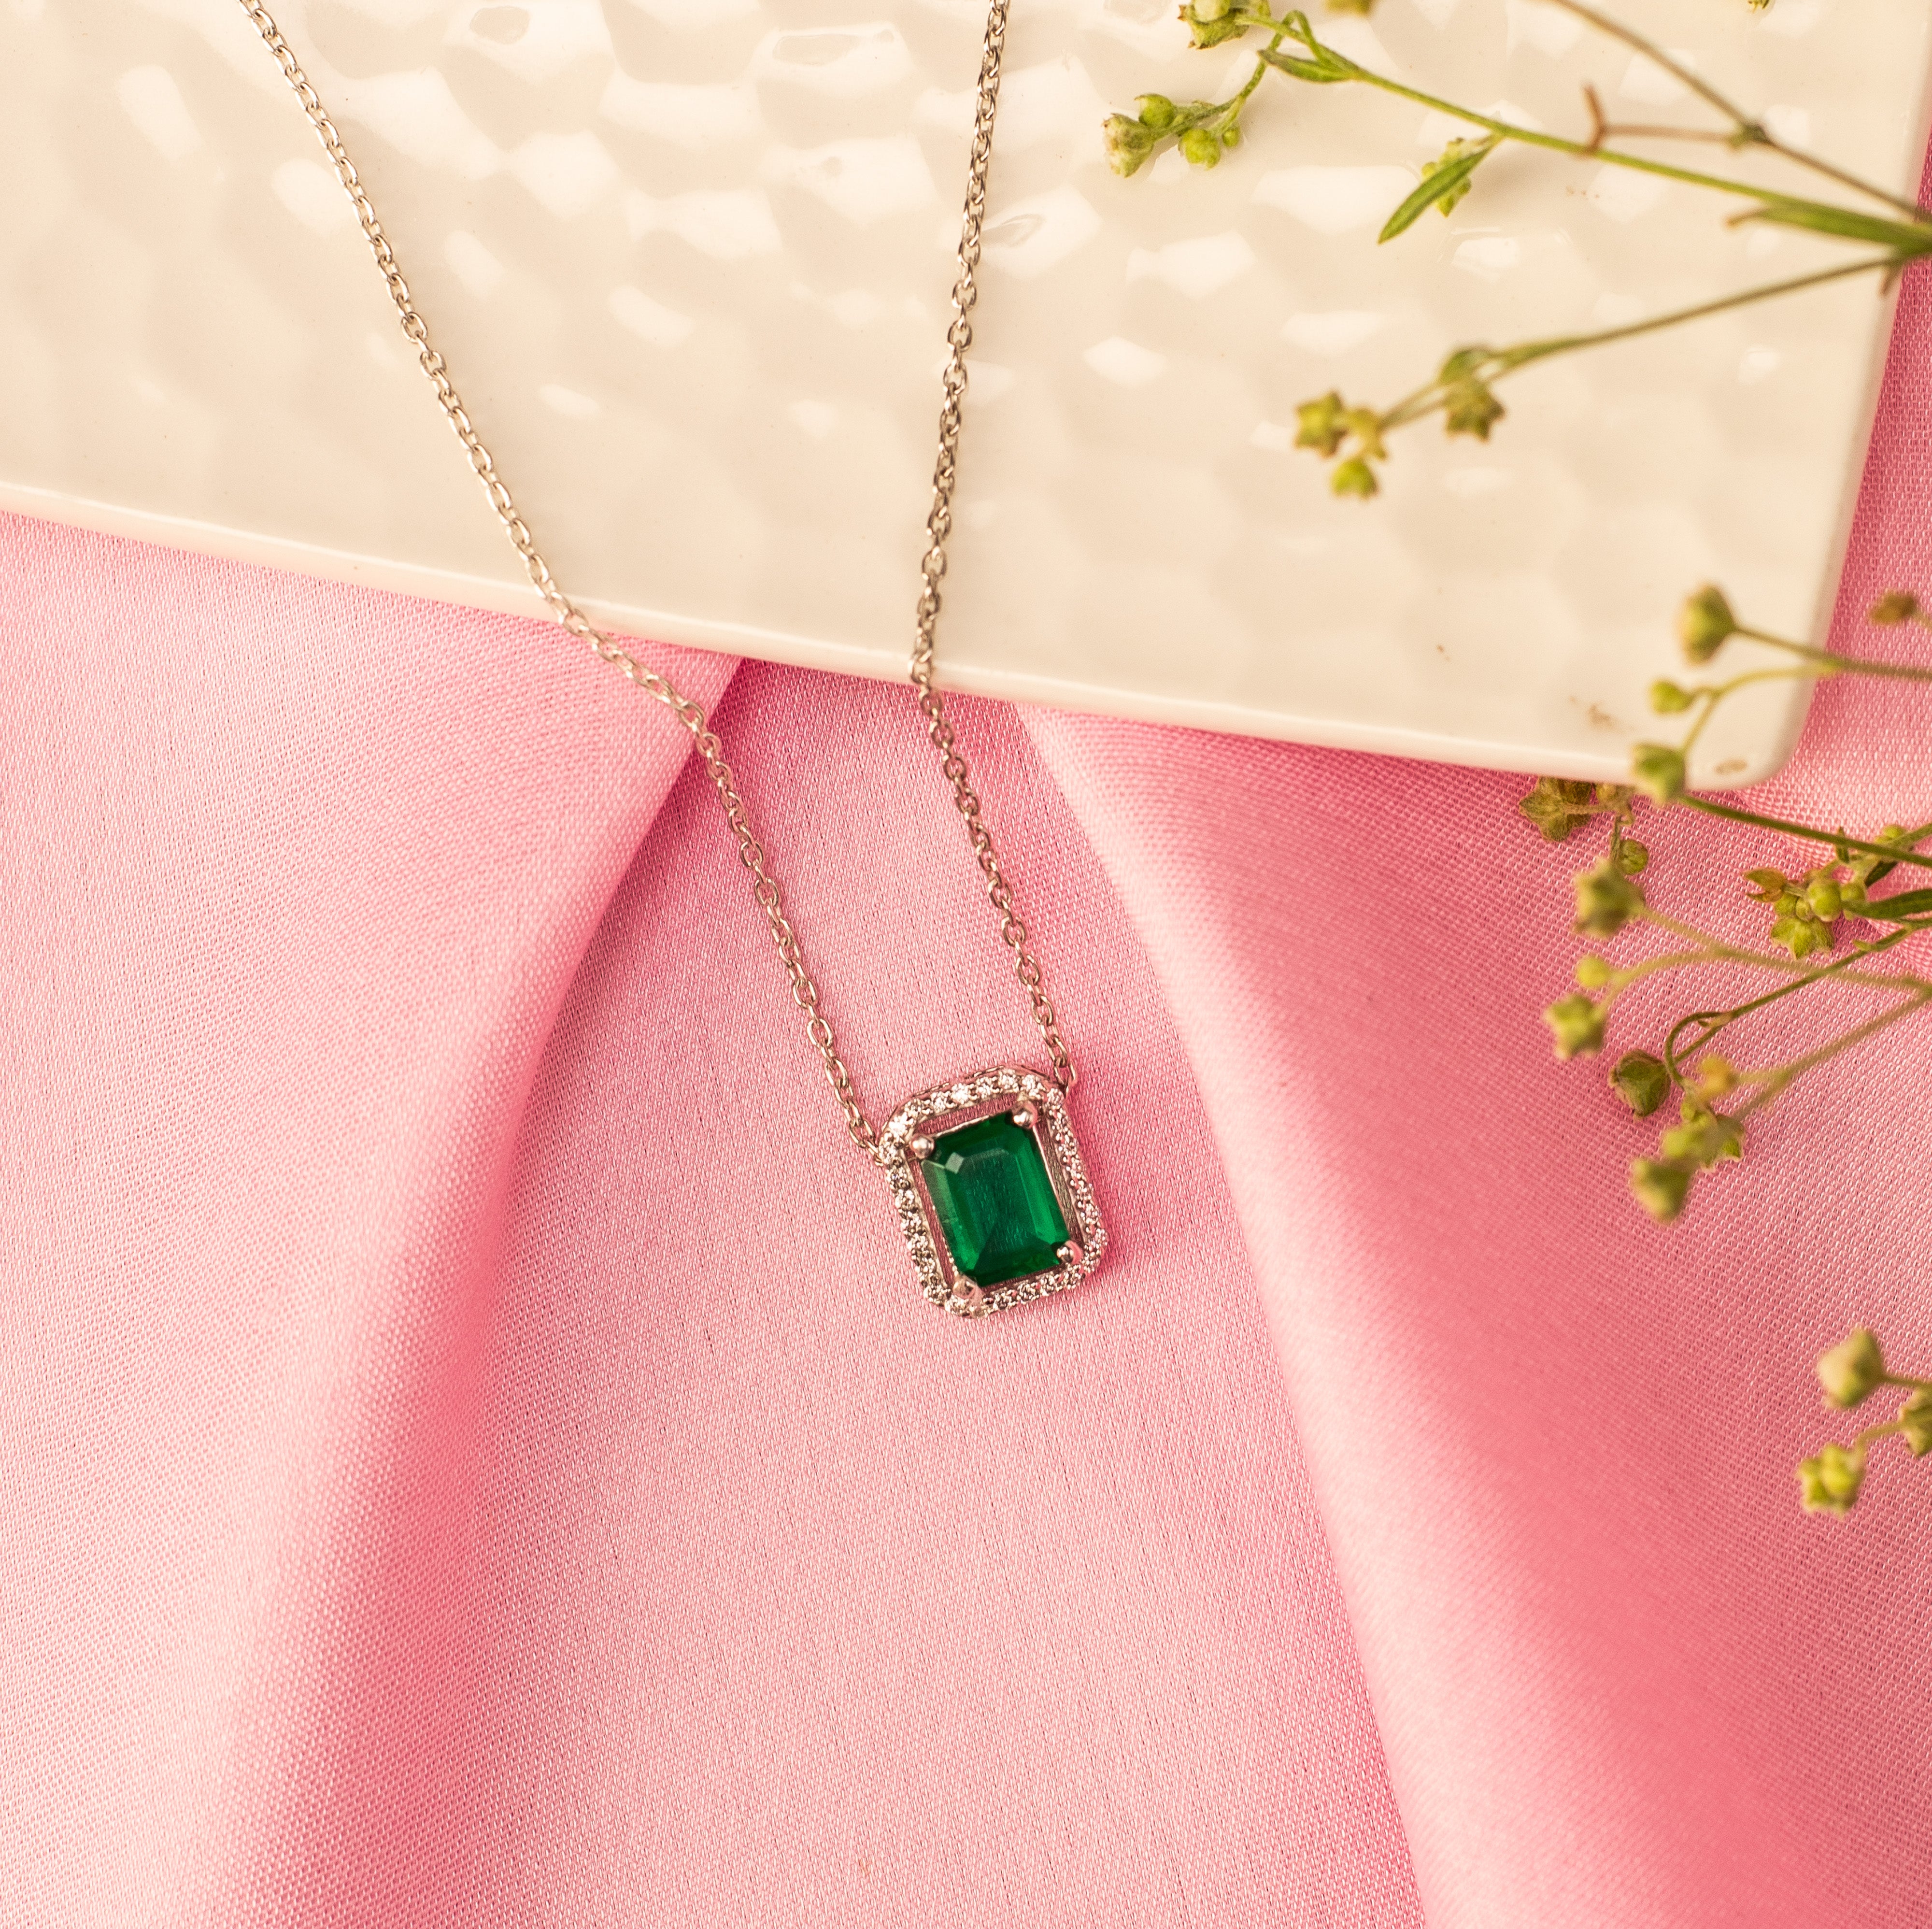 Emerald Green Necklace, May Birthstone Pendant, Gold Filled Emerald Necklace,  Tiny Silver Teardrop Emerald Choker Necklace - Etsy | Pretty jewelry  necklaces, Emerald green necklace, Jewelry lookbook